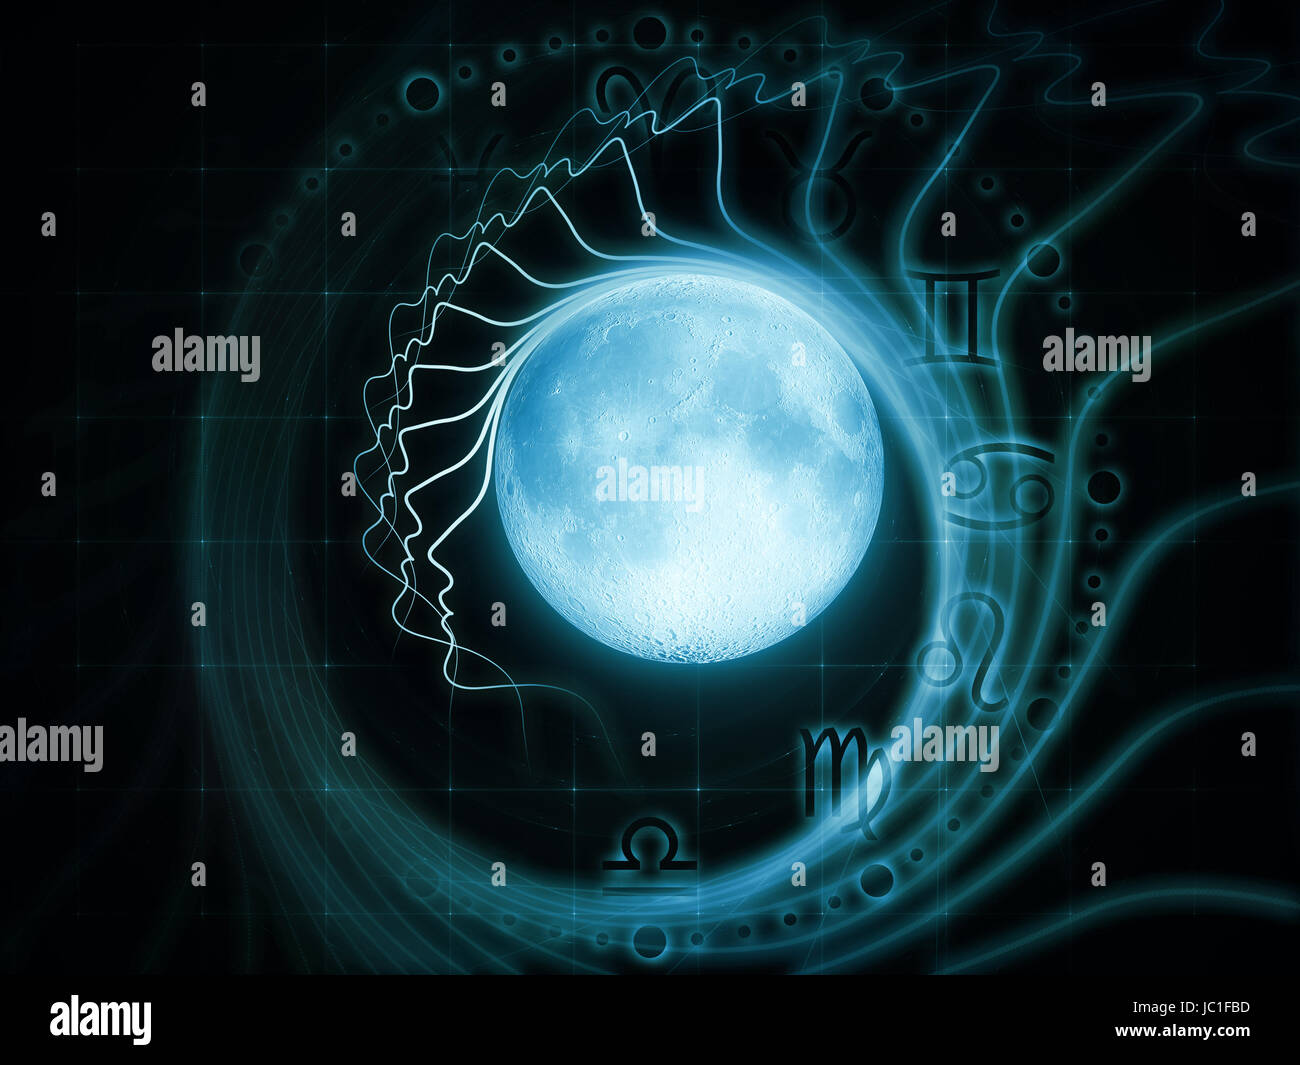 Inner Moon series. Composition of moon, human profile and astrological symbols on the subject of spirit world, dreams, imagination, astrology and the mind Stock Photo